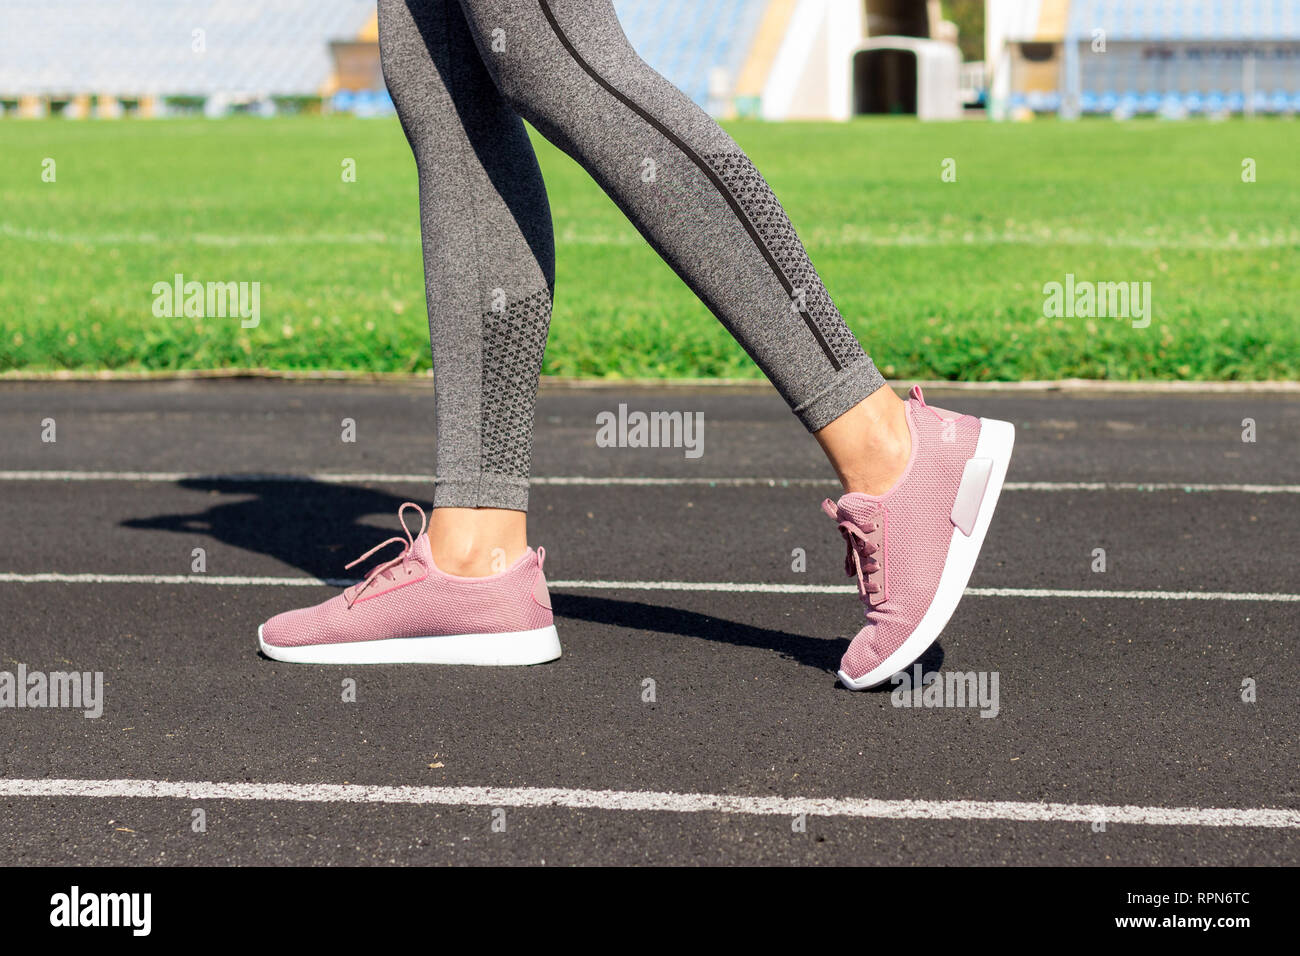 Girl legs in pink sport shoes standing on a running track with stadium  stands. Sports and healthy concept Stock Photo - Alamy